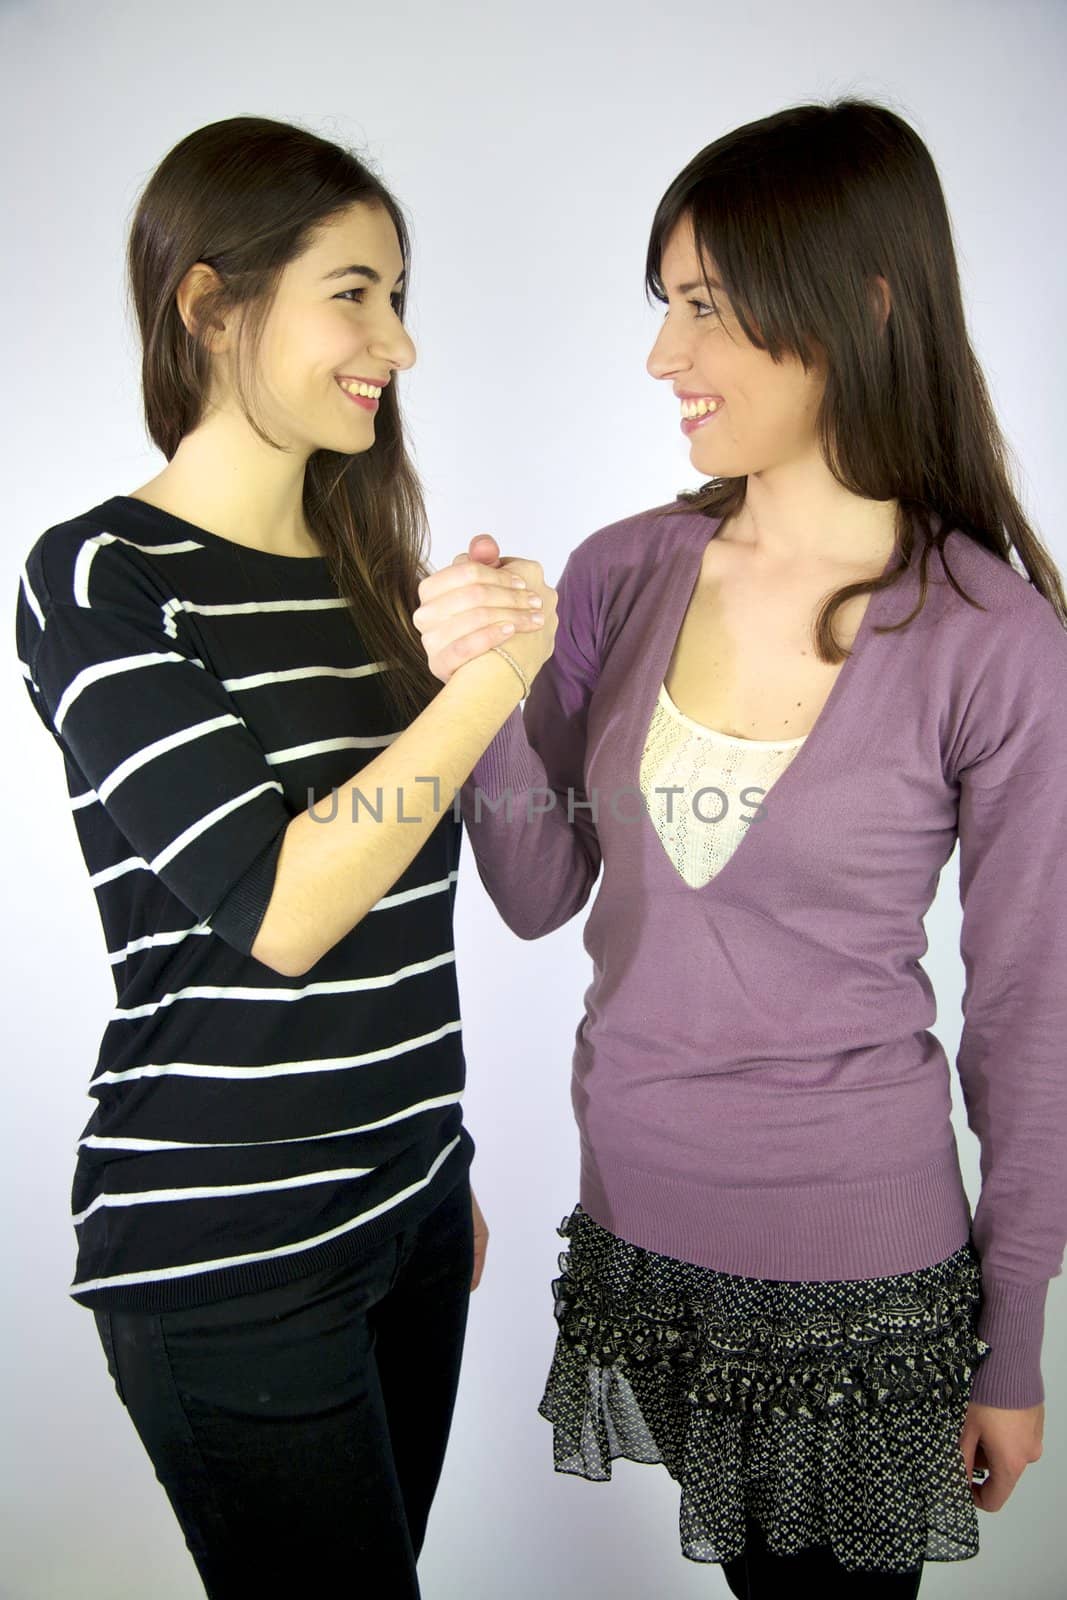 Female models holding hand sign of friendship by fmarsicano